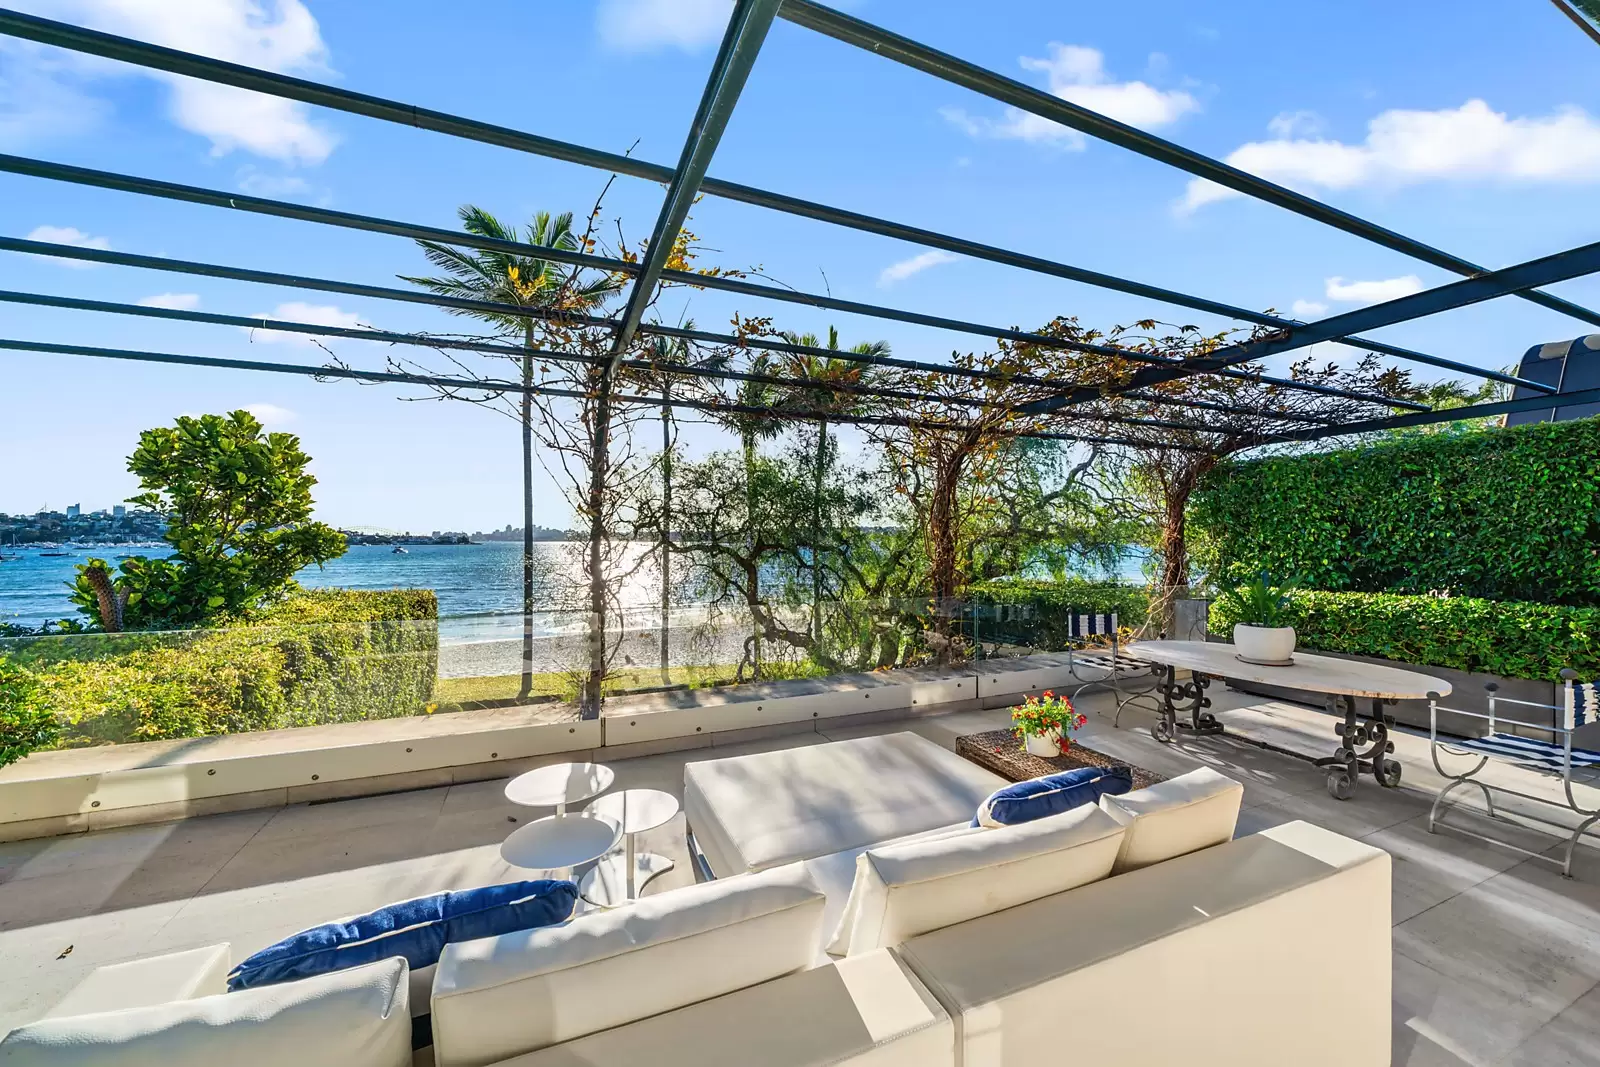 Photo #11: 5 Collins Avenue, Rose Bay - Sold by Sydney Sotheby's International Realty